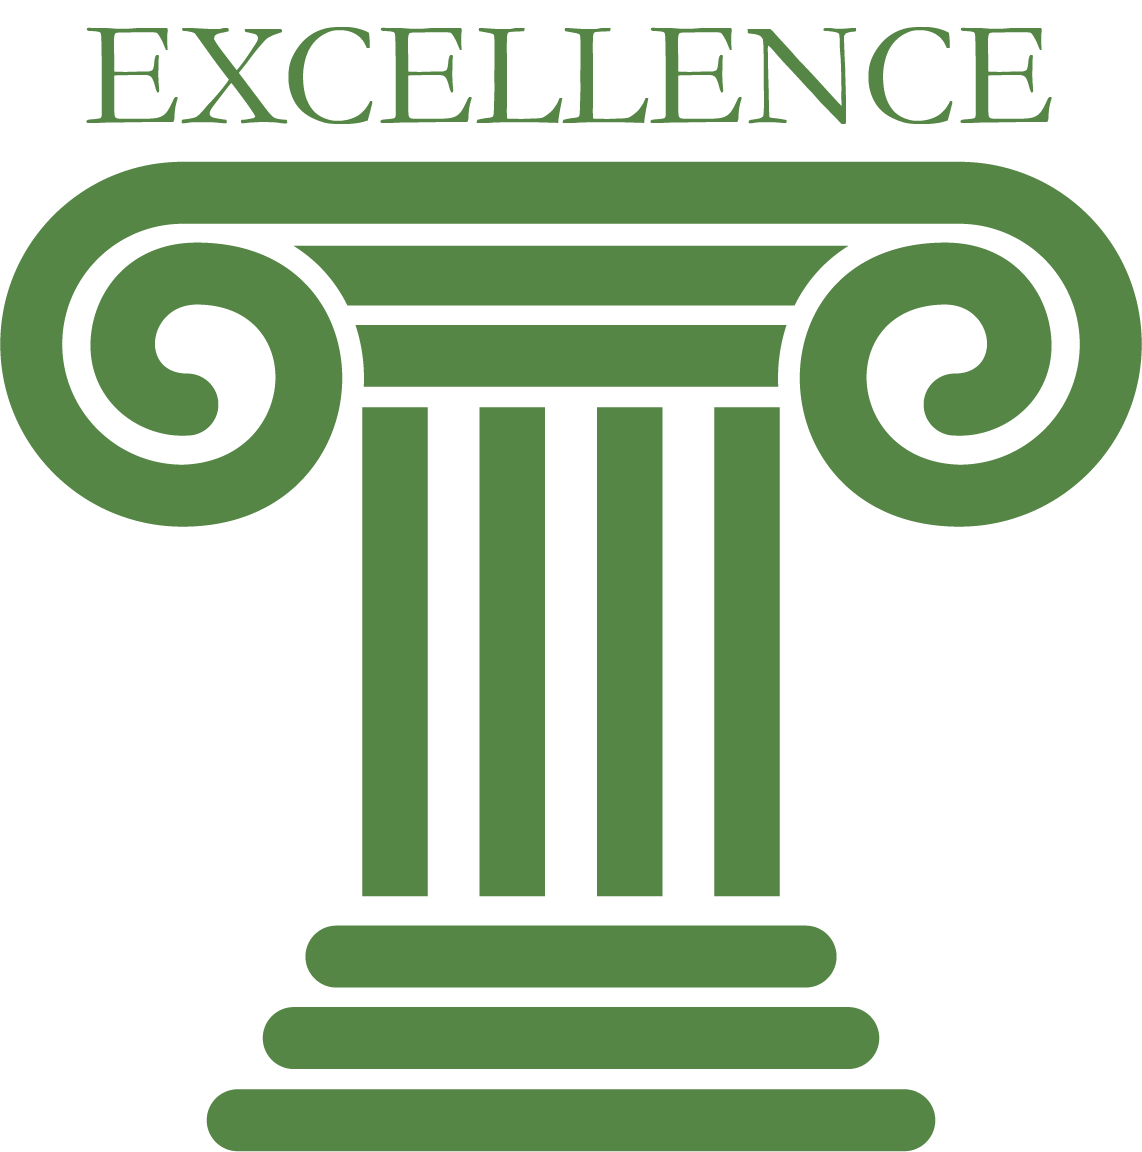 Greek Pillar with the word Excellence at the top